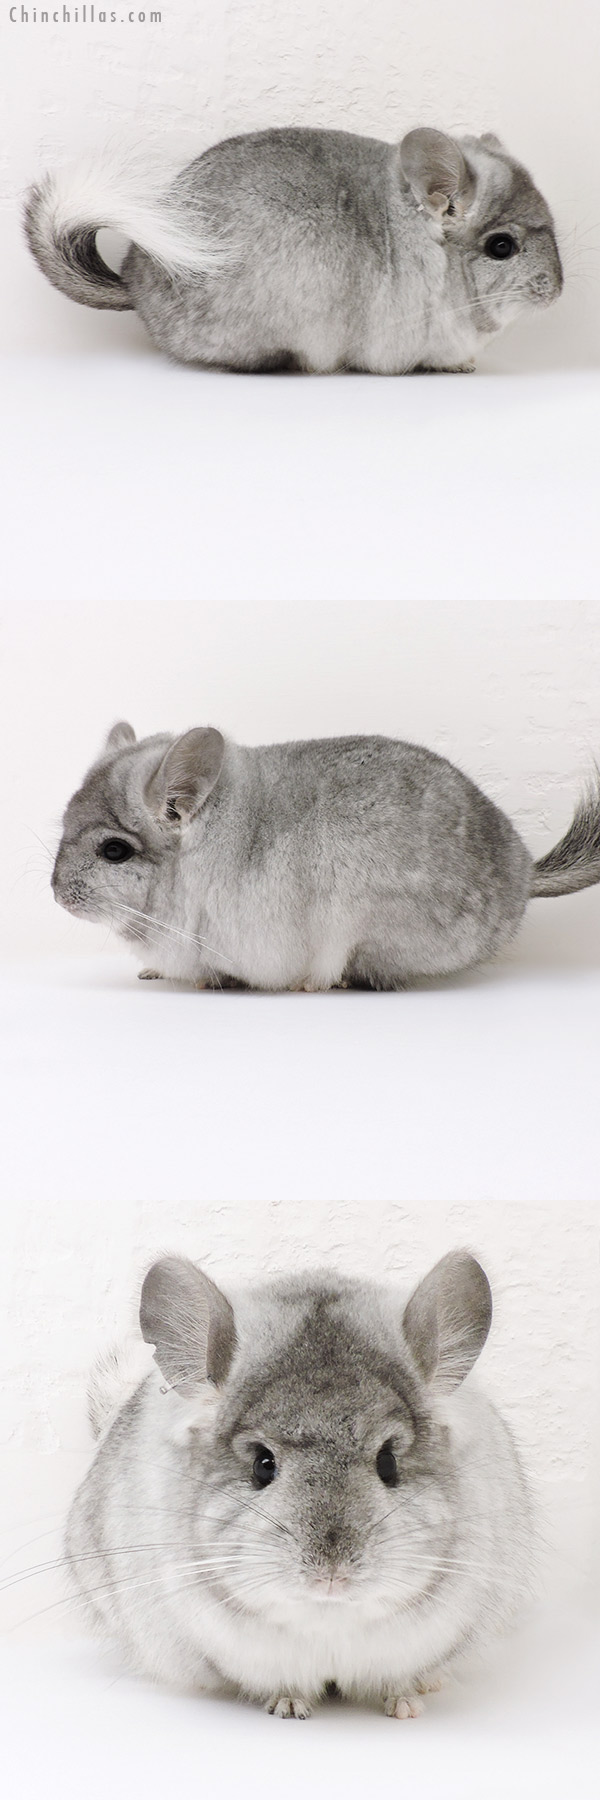 Chinchilla or related item offered for sale or export on Chinchillas.com - 16260 Exceptional Silver Mosaic  Royal Persian Angora Male Chinchilla